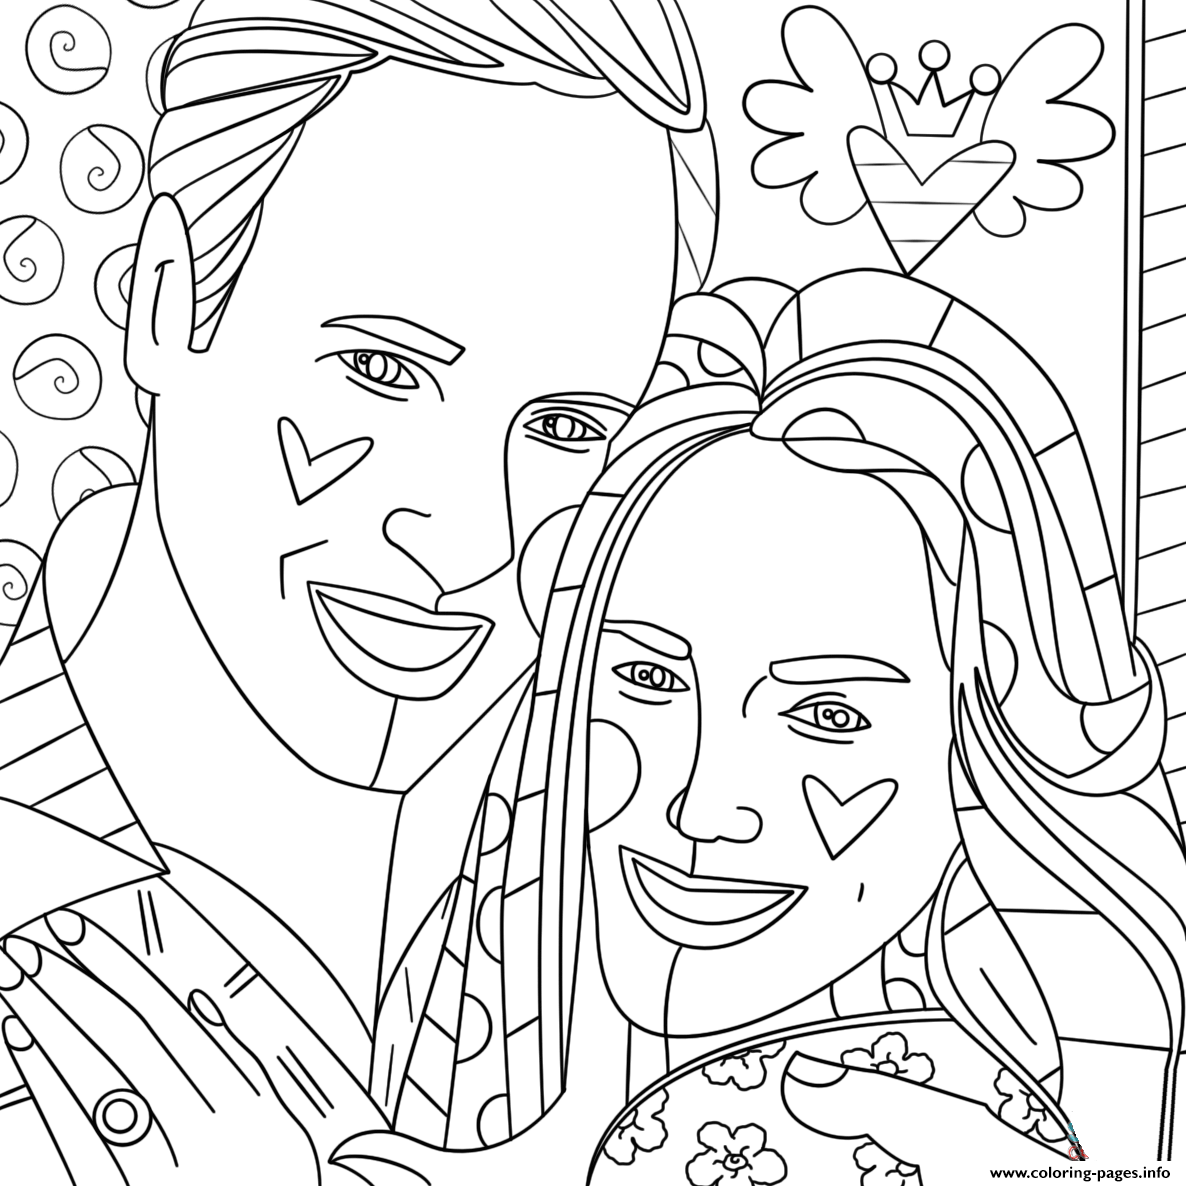 Kate Middleton And Prince William By Romero Britto coloring